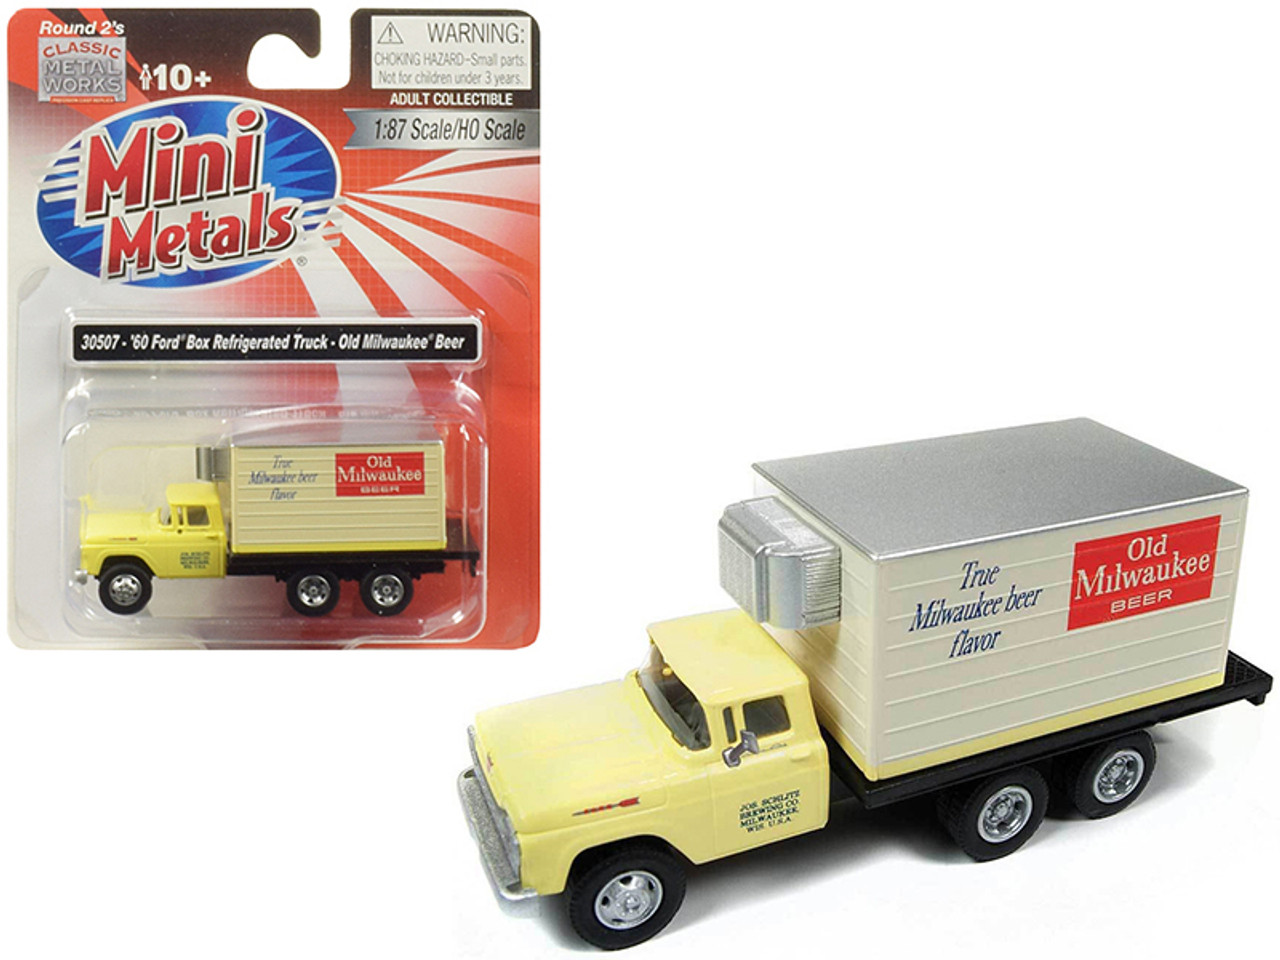 1960 Ford Box (Reefer) Refrigerated Truck "Old Milwaukee Beer" Yellow 1/87 (HO) Scale Model by Classic Metal Works